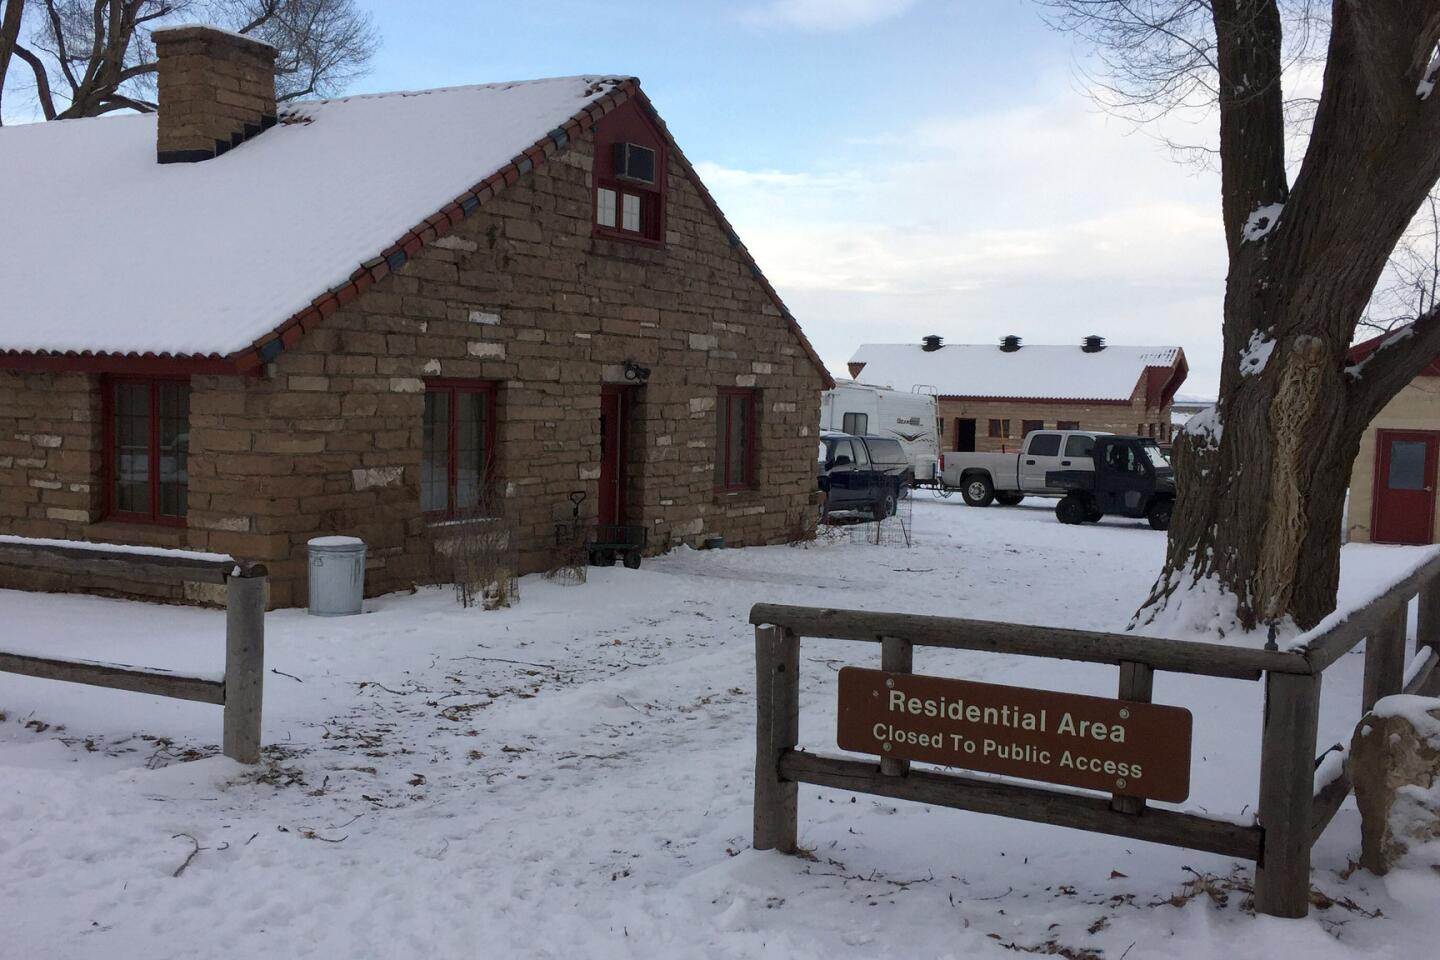 Federal buildings at the Malheur National Wildlife Refuge. Protesters are occupying the refuge in Oregon to object to a prison sentence for local ranchers.